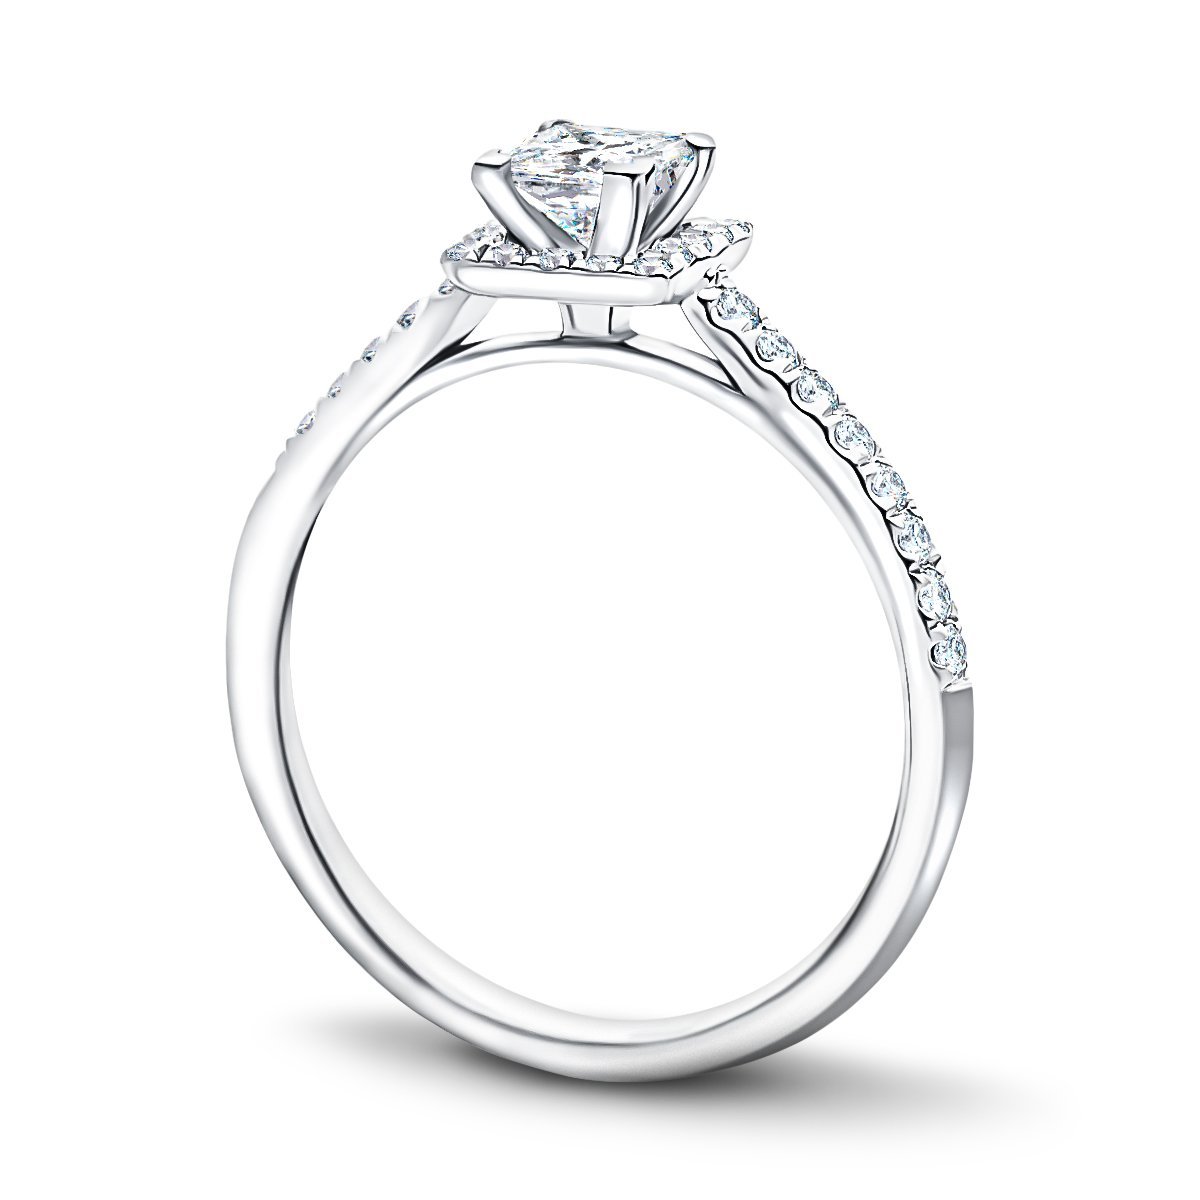 Princess Halo Diamond Engagement Ring with 0.40ct in 18k White Gold - All Diamond